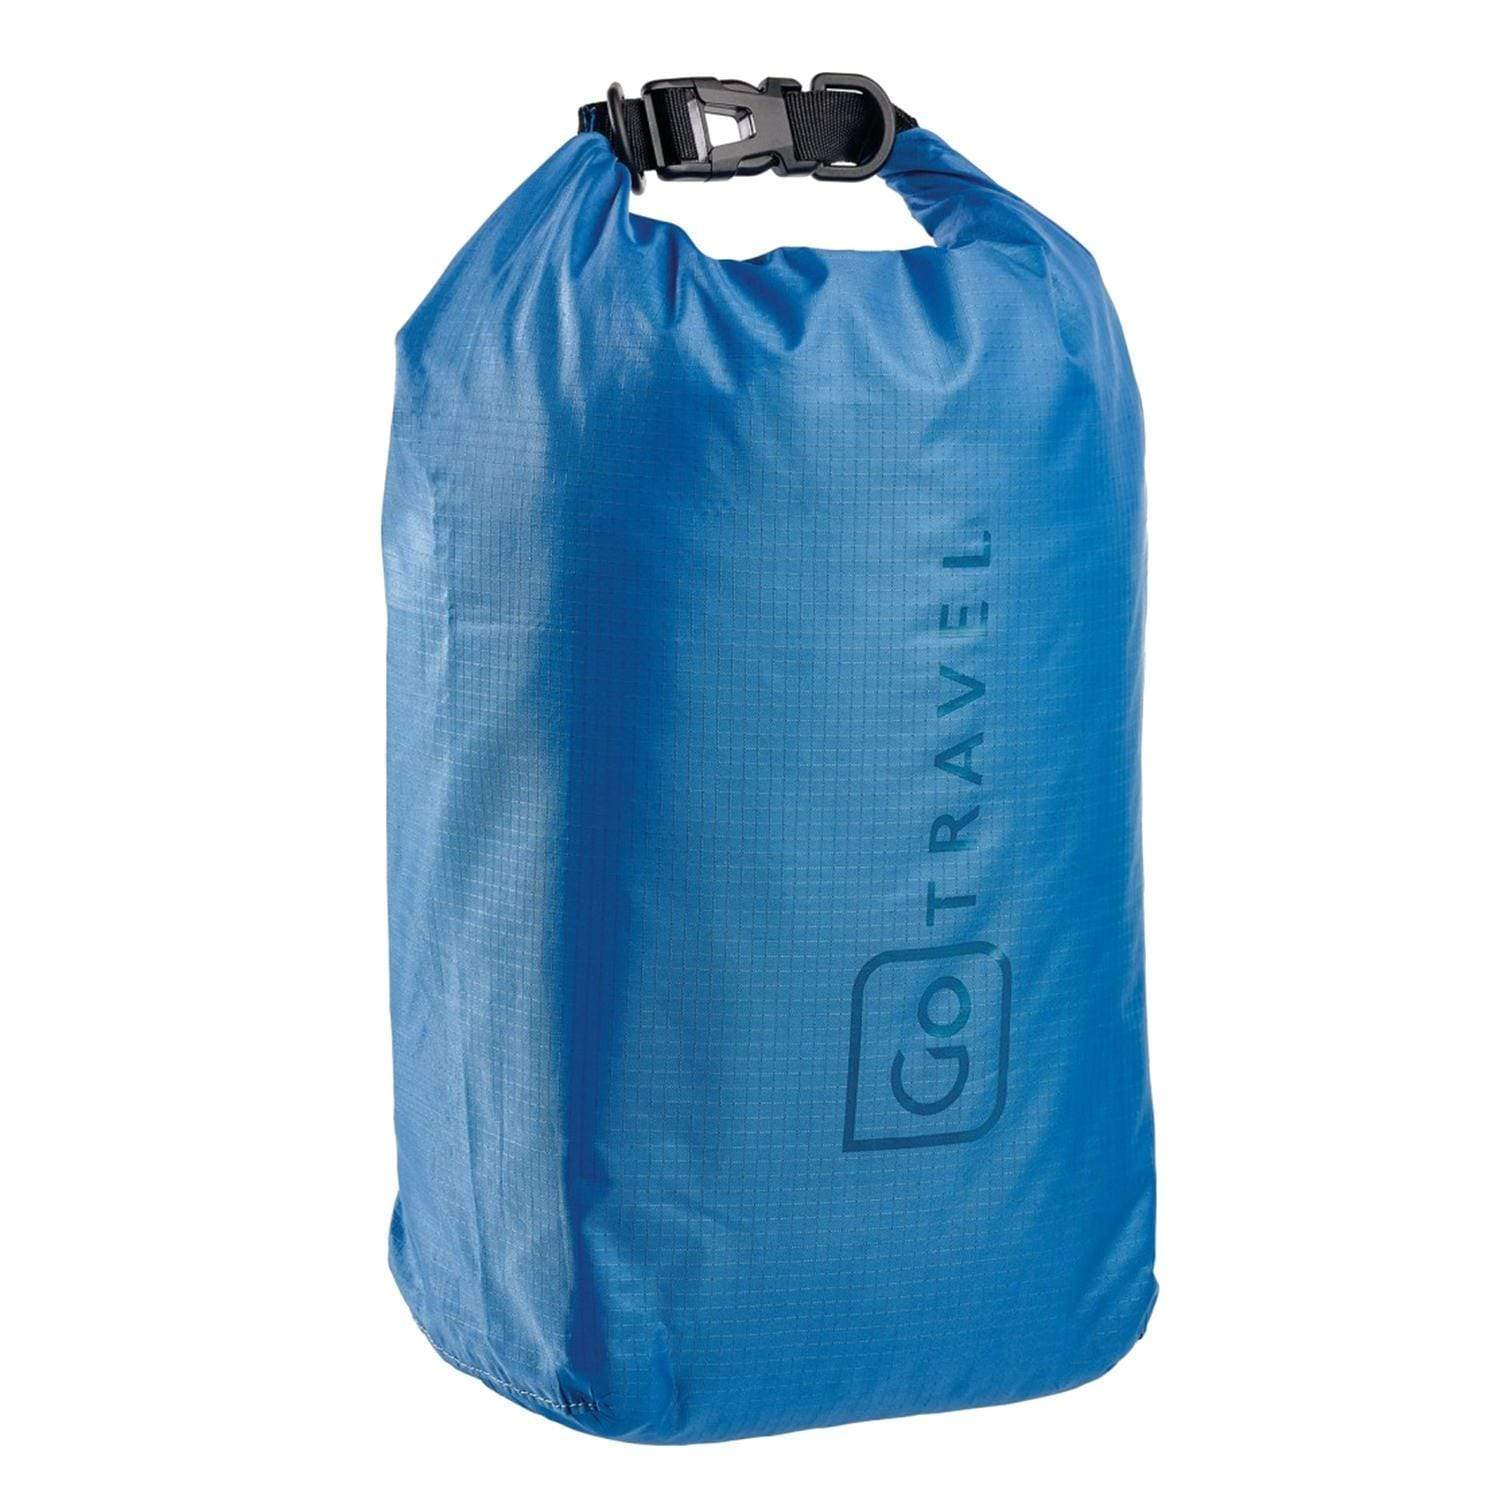 Go Travel Wet and Dry Bag - 305 - Jashanmal Home